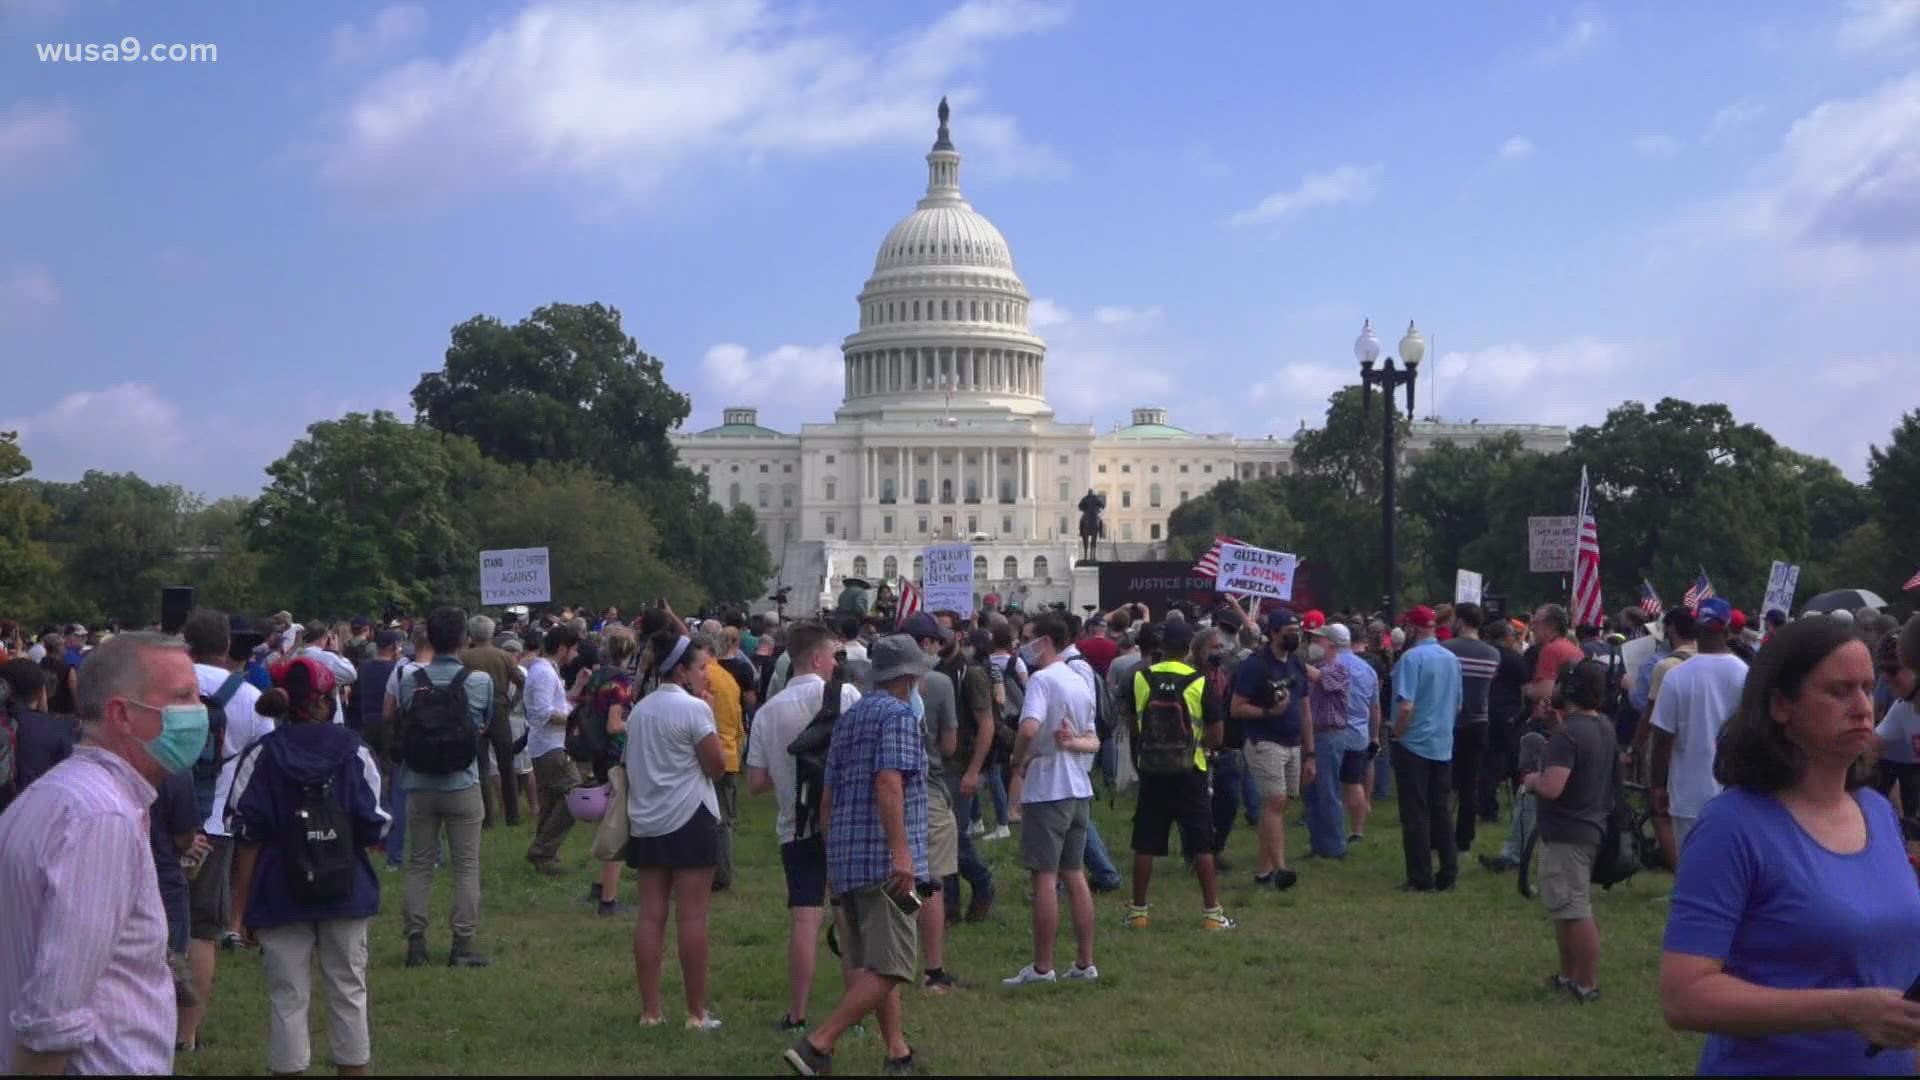 The “Justice for J6” rally was organized by Matt Braynard, a former staffer for the Trump campaign who and founded the right-wing political group Look Ahead America.